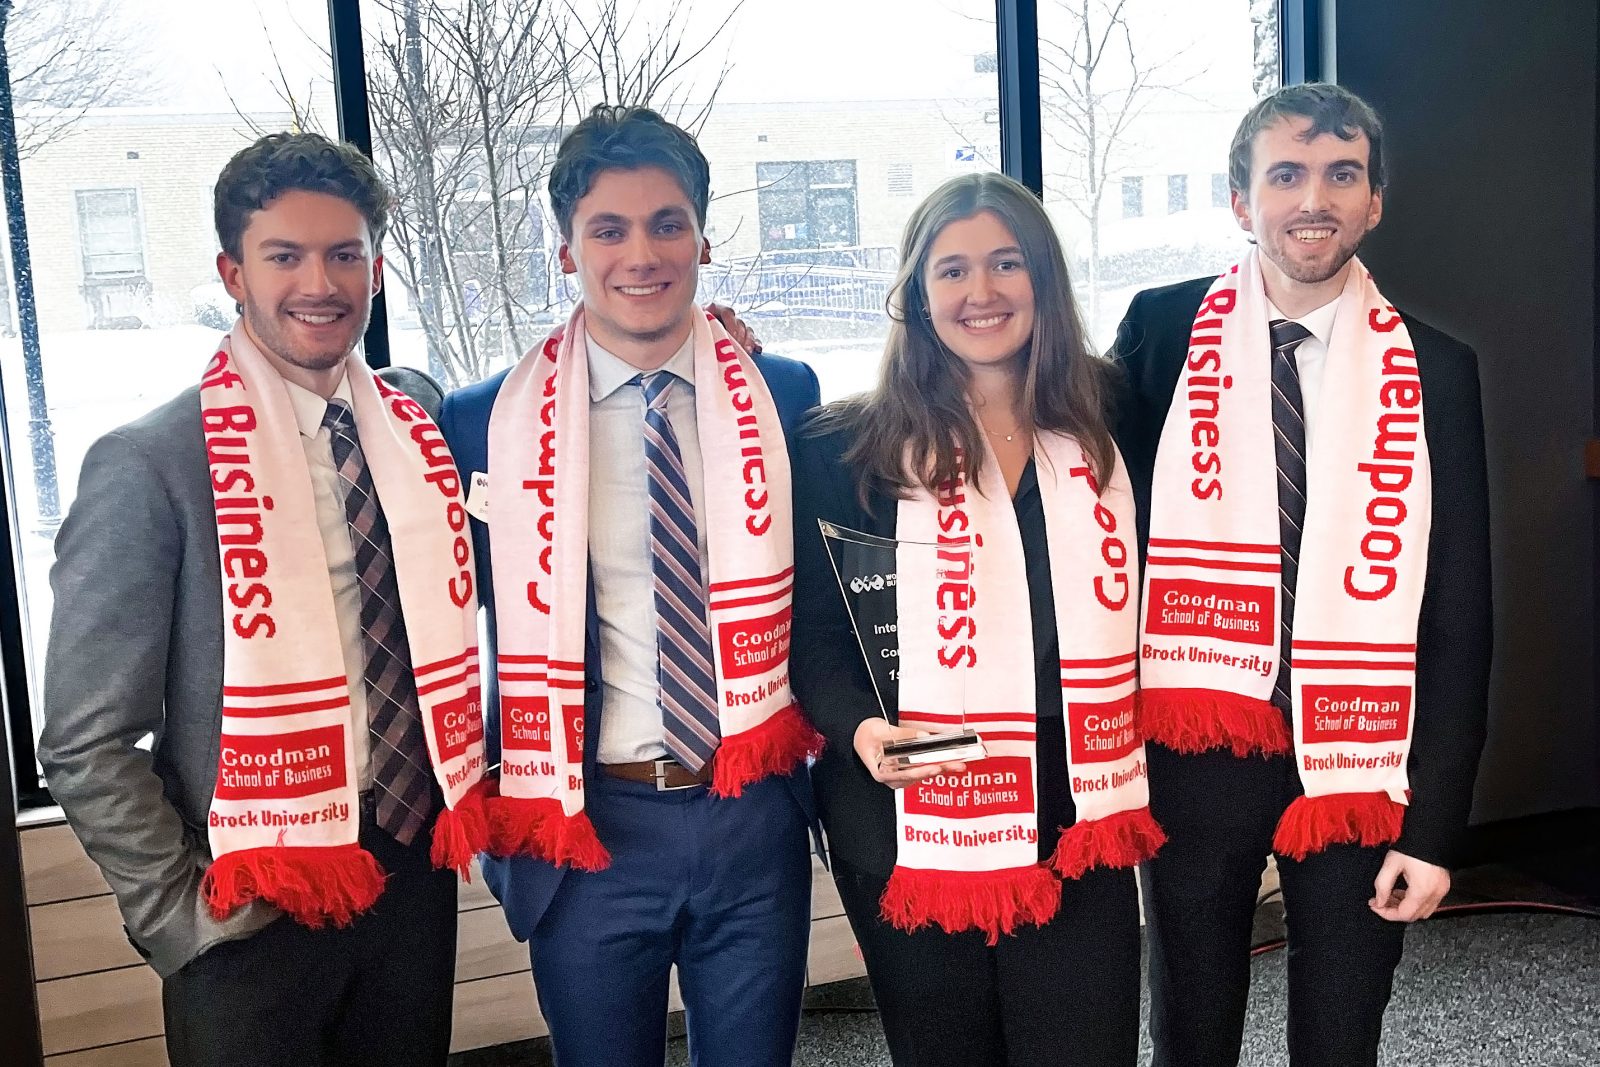 : Four students in suits wear red and white scarves that say Goodman School of Business while holding a clear glass trophy.